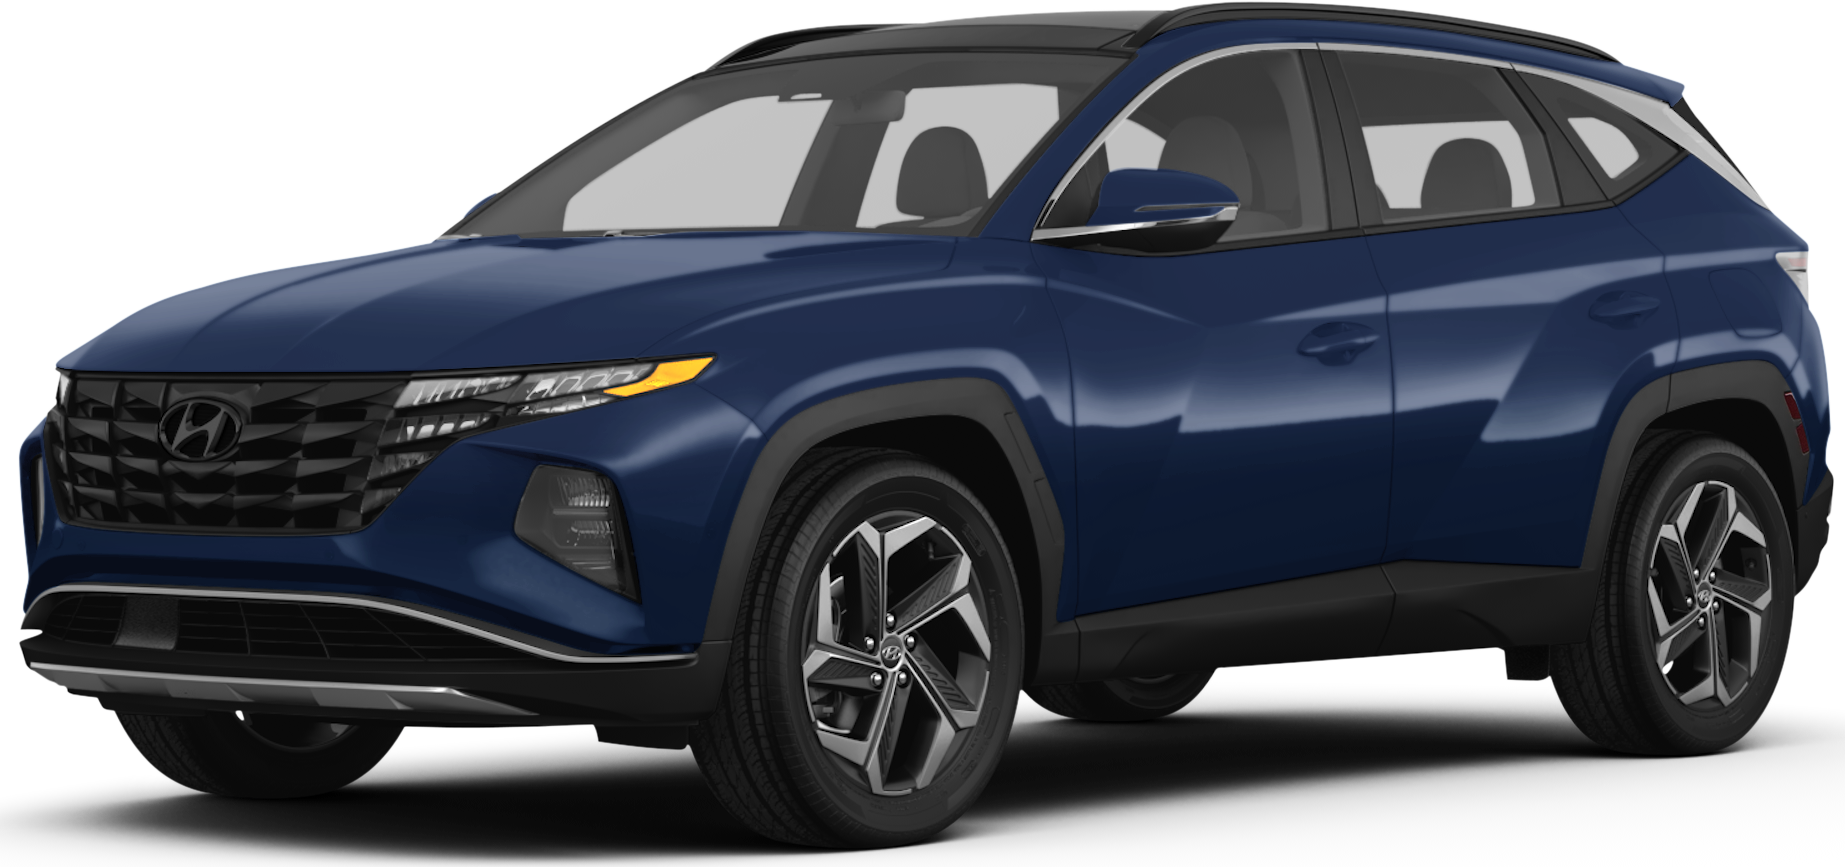 Hyundai Tucson Pros and Cons: What To Know When Weighing Your